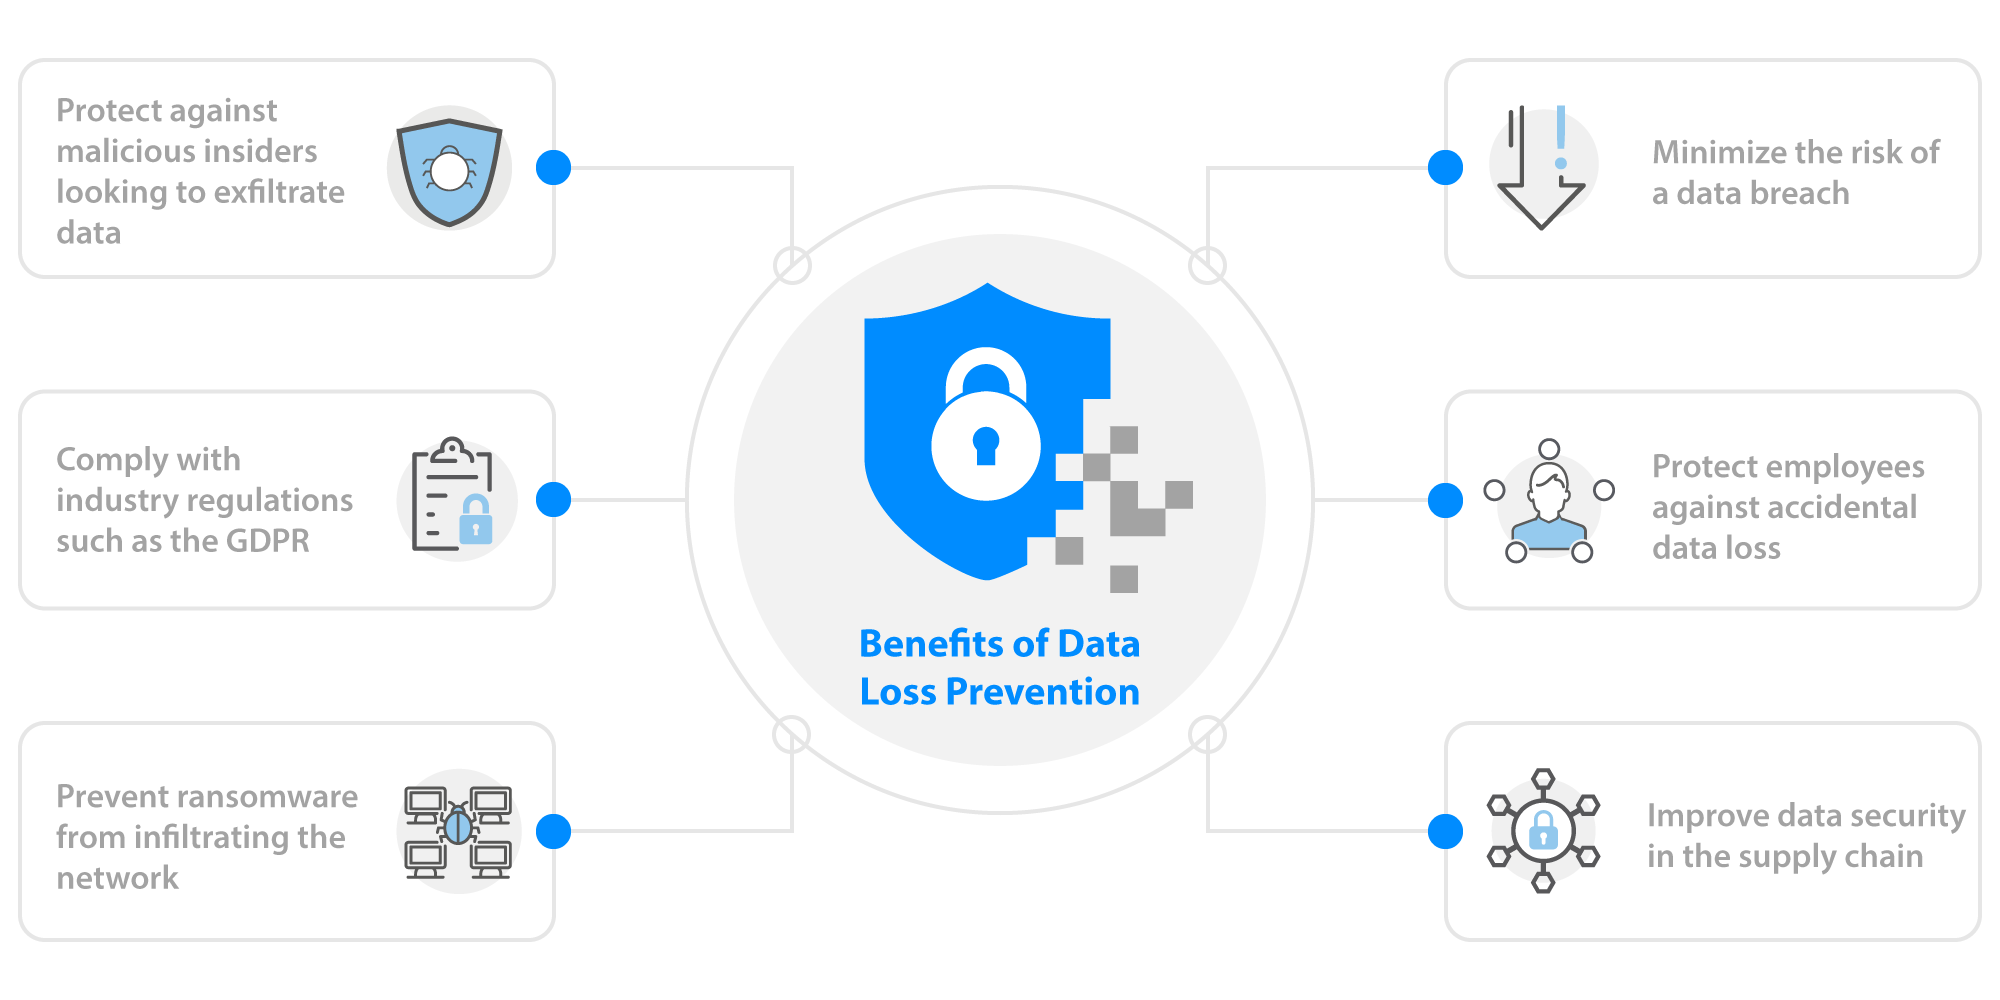 The benefits of Data Loss Prevention